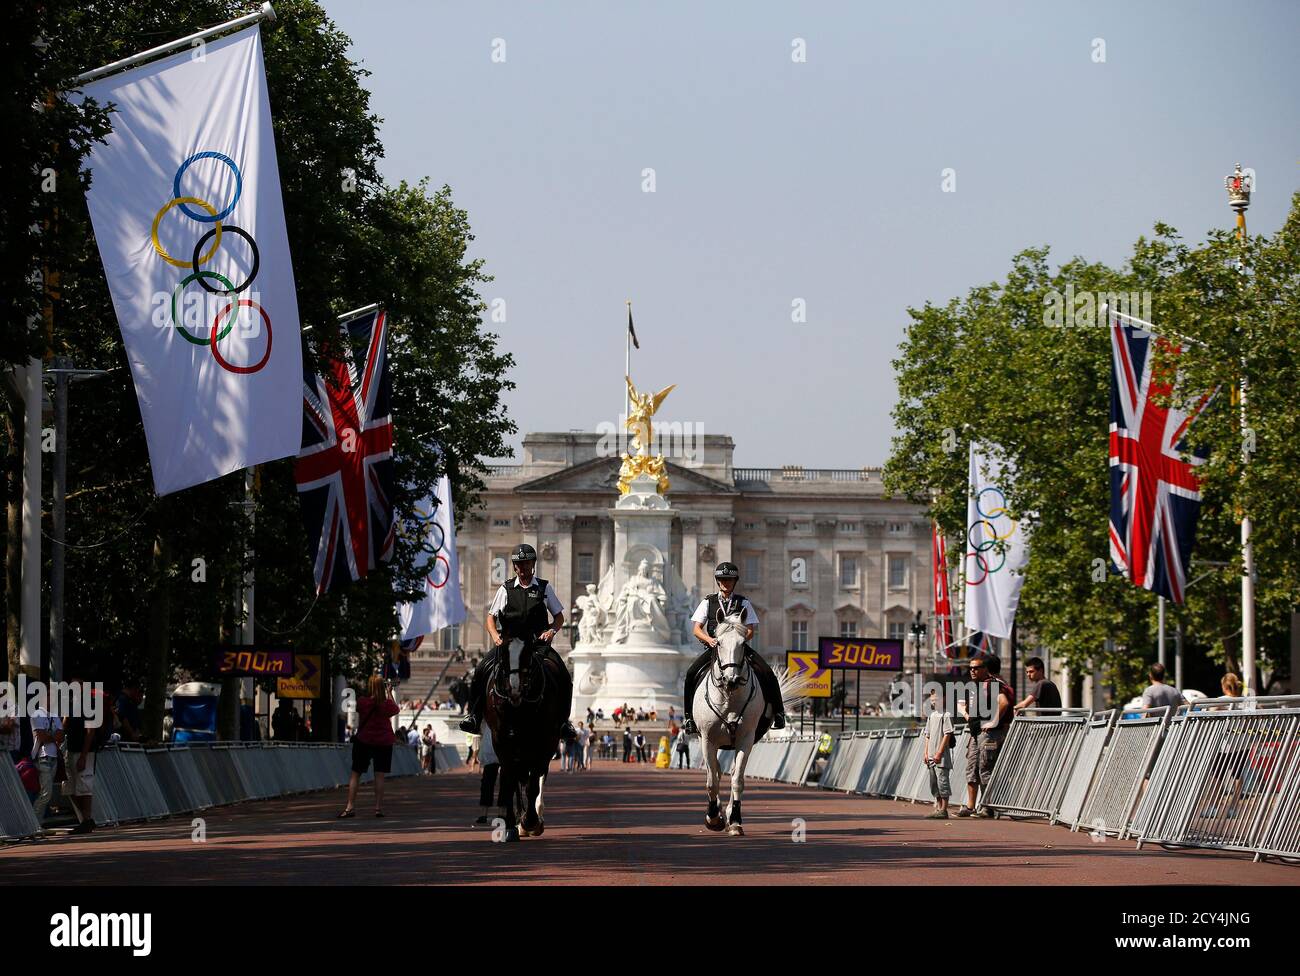 Mounted police patrol in front of Buckingam Palace down The Mall which will serve as the start and finish area for the road cycling race event at the London 2012 Olympic Games July 26, 2012.  REUTERS/Paul Hanna  (BRITAIN - Tags: SPORT OLYMPICS CYCLING) Stock Photo